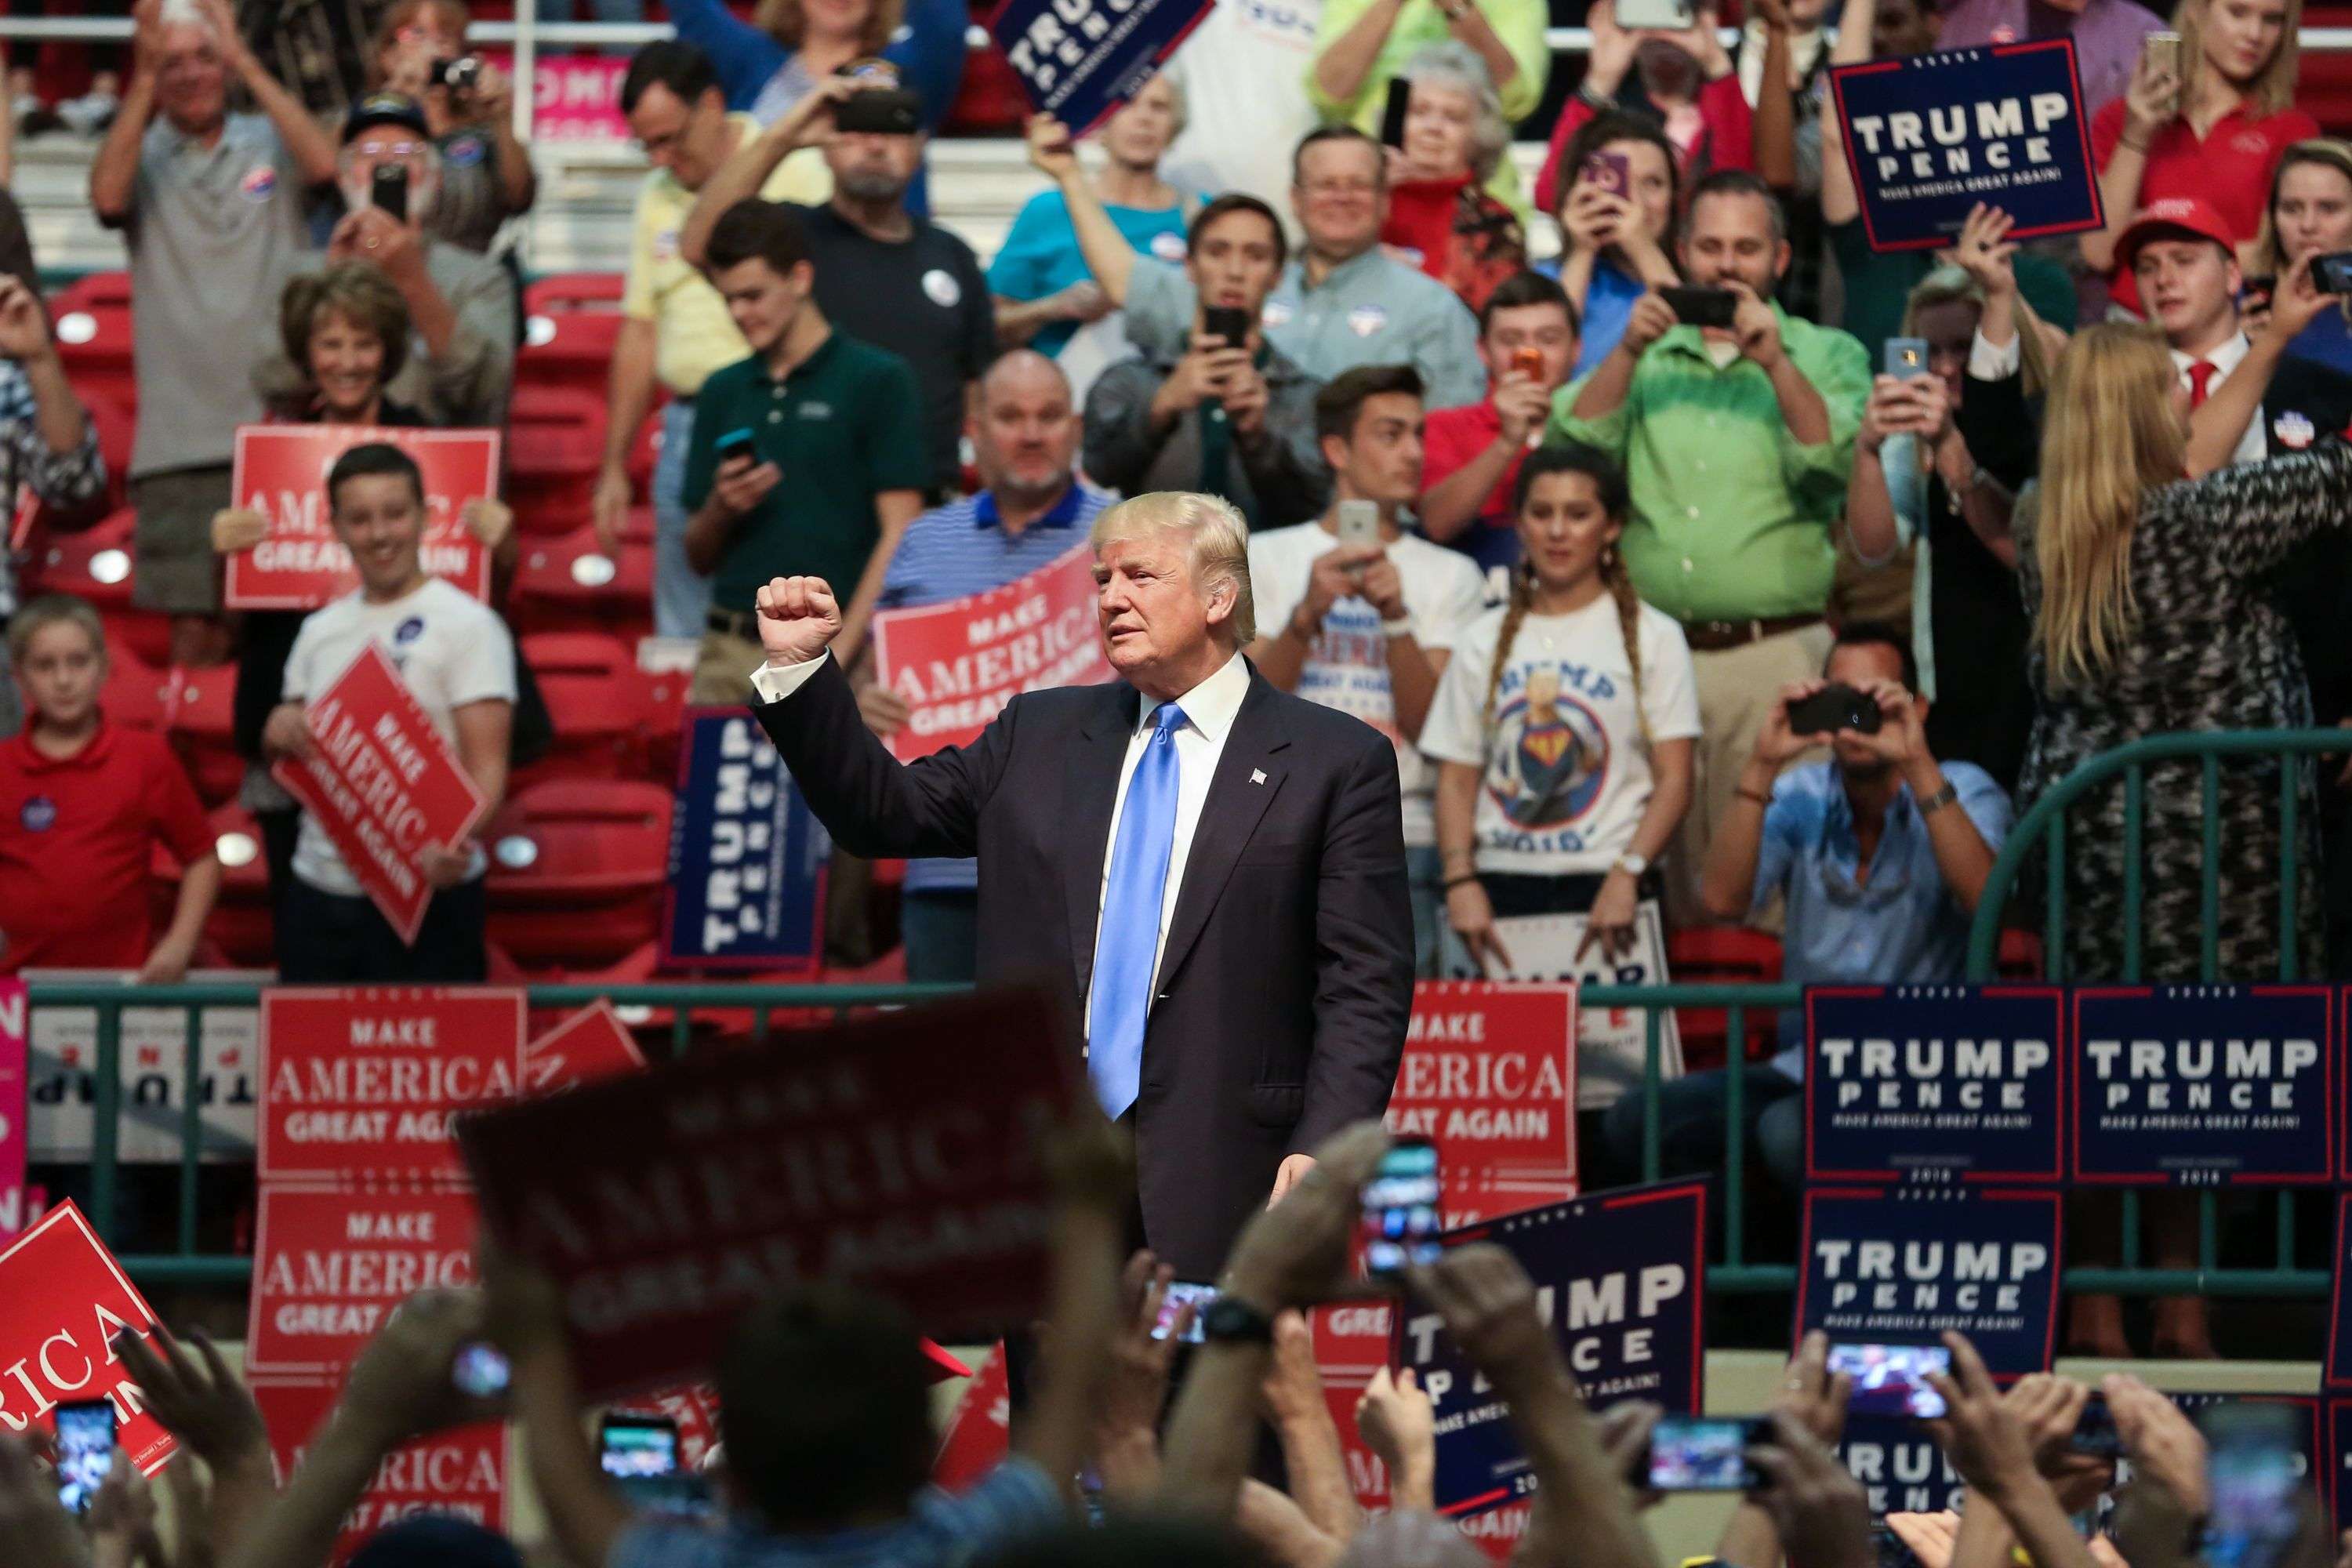 Republican presidential nominee Donald Trump speaks during a campaign rally inside the Cabarrus Arena 7 Events Center in Concord, North Carolina. Photo: AFP